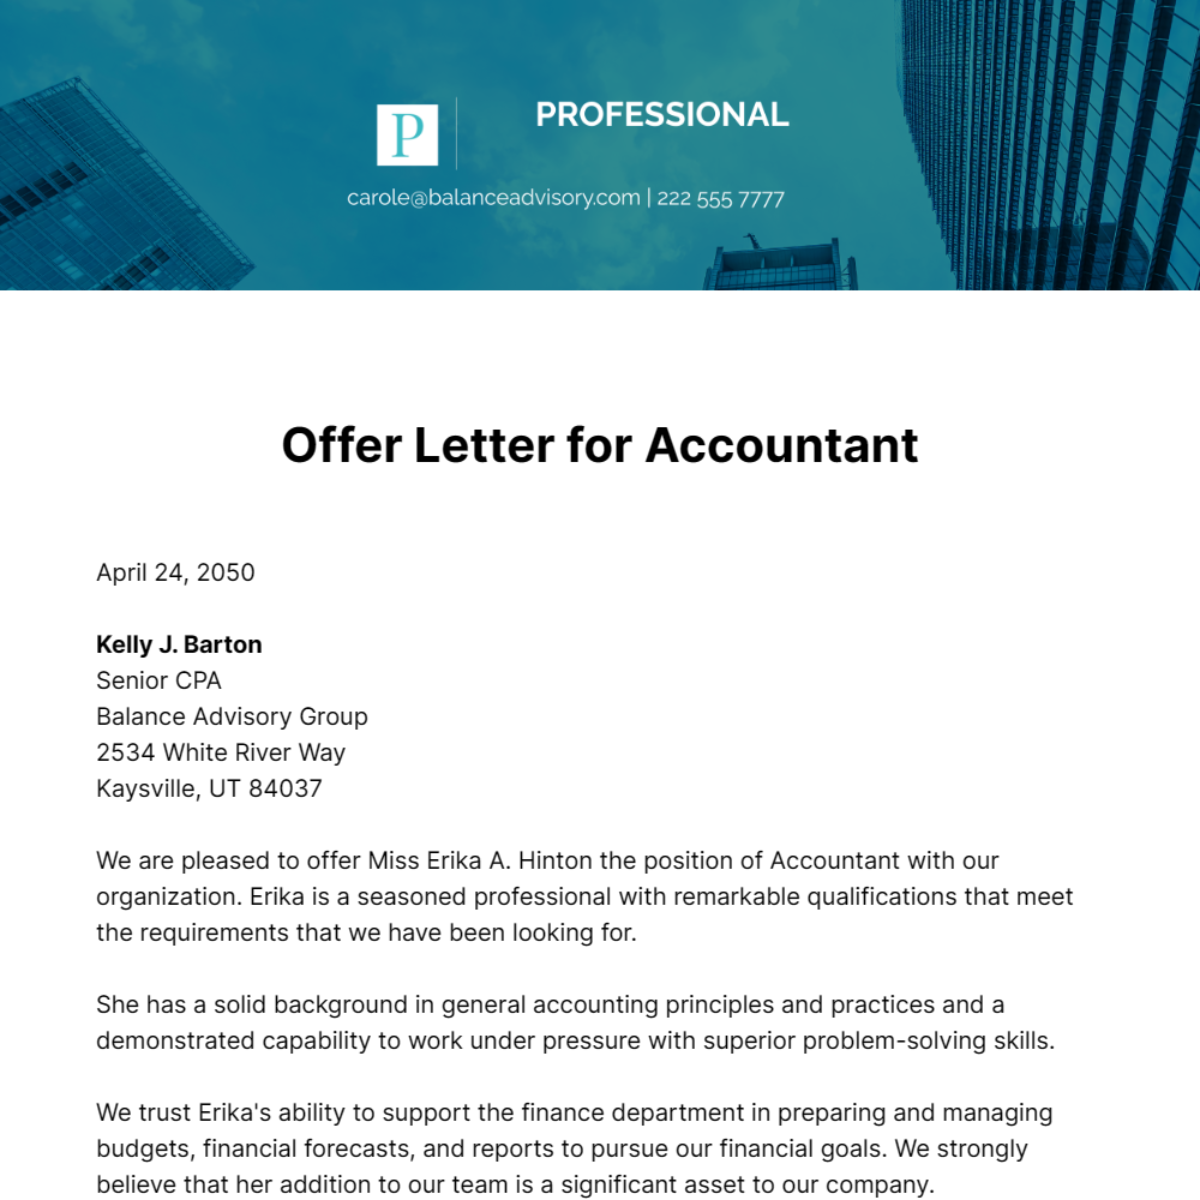 Offer Letter for Accountant Template